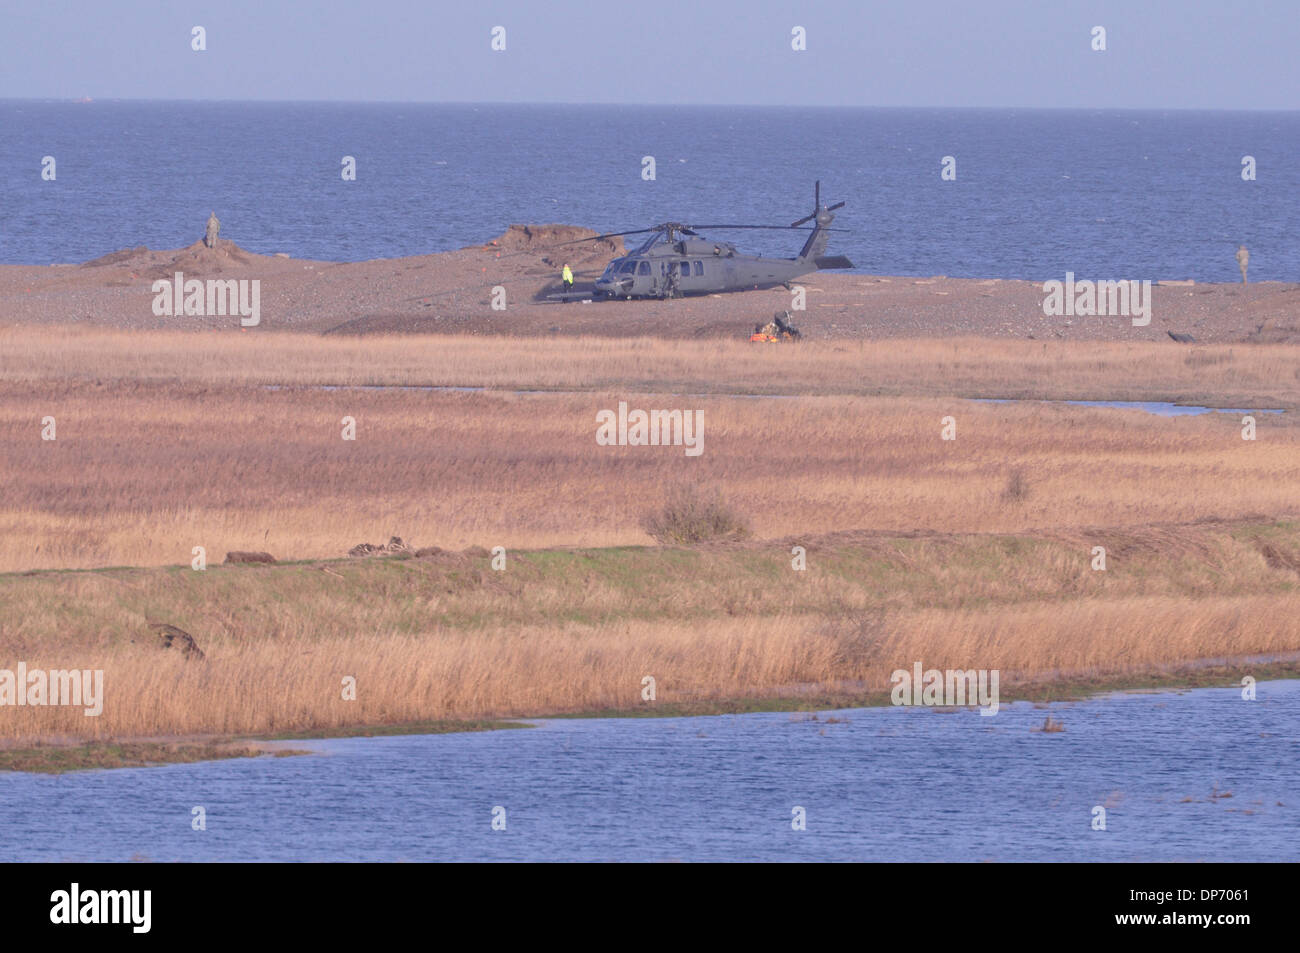 Cley-next-the Sea, Norfolk, UK. 8th Jan, 2014. Pave Hawk crashed 8pm 7th January 2014 on shingle bank at at Cley-next-the Sea Norfolk UK. Crew of four dead. An intact accompanying aircraft sits on the shingle with wreckage of the lost aircraft just visible this side of it. Credit:  John Worrall/Alamy Live News Stock Photo